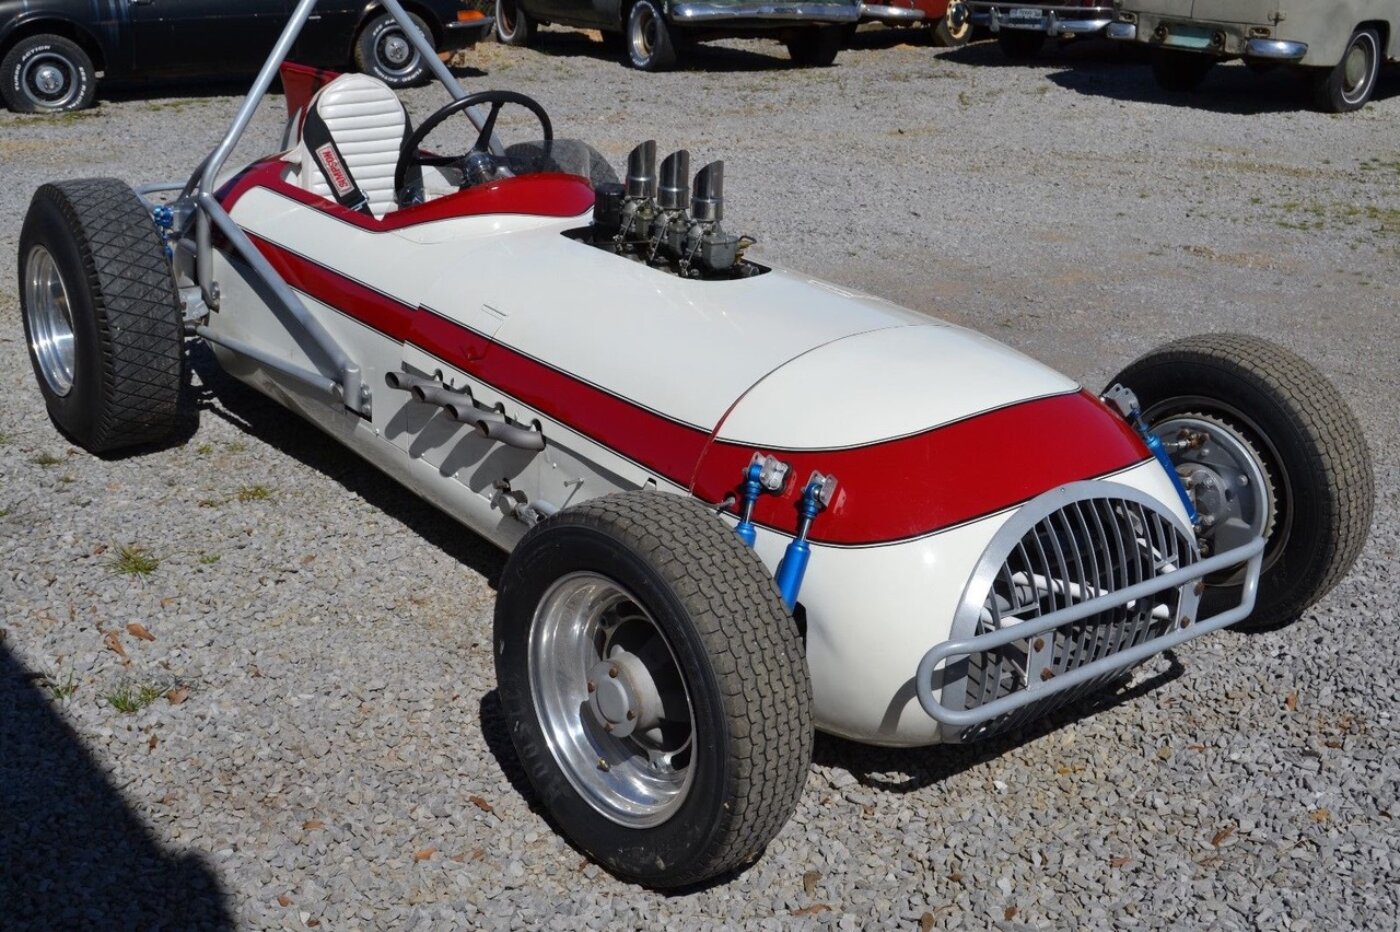 						1952 Indy Racer 8
			